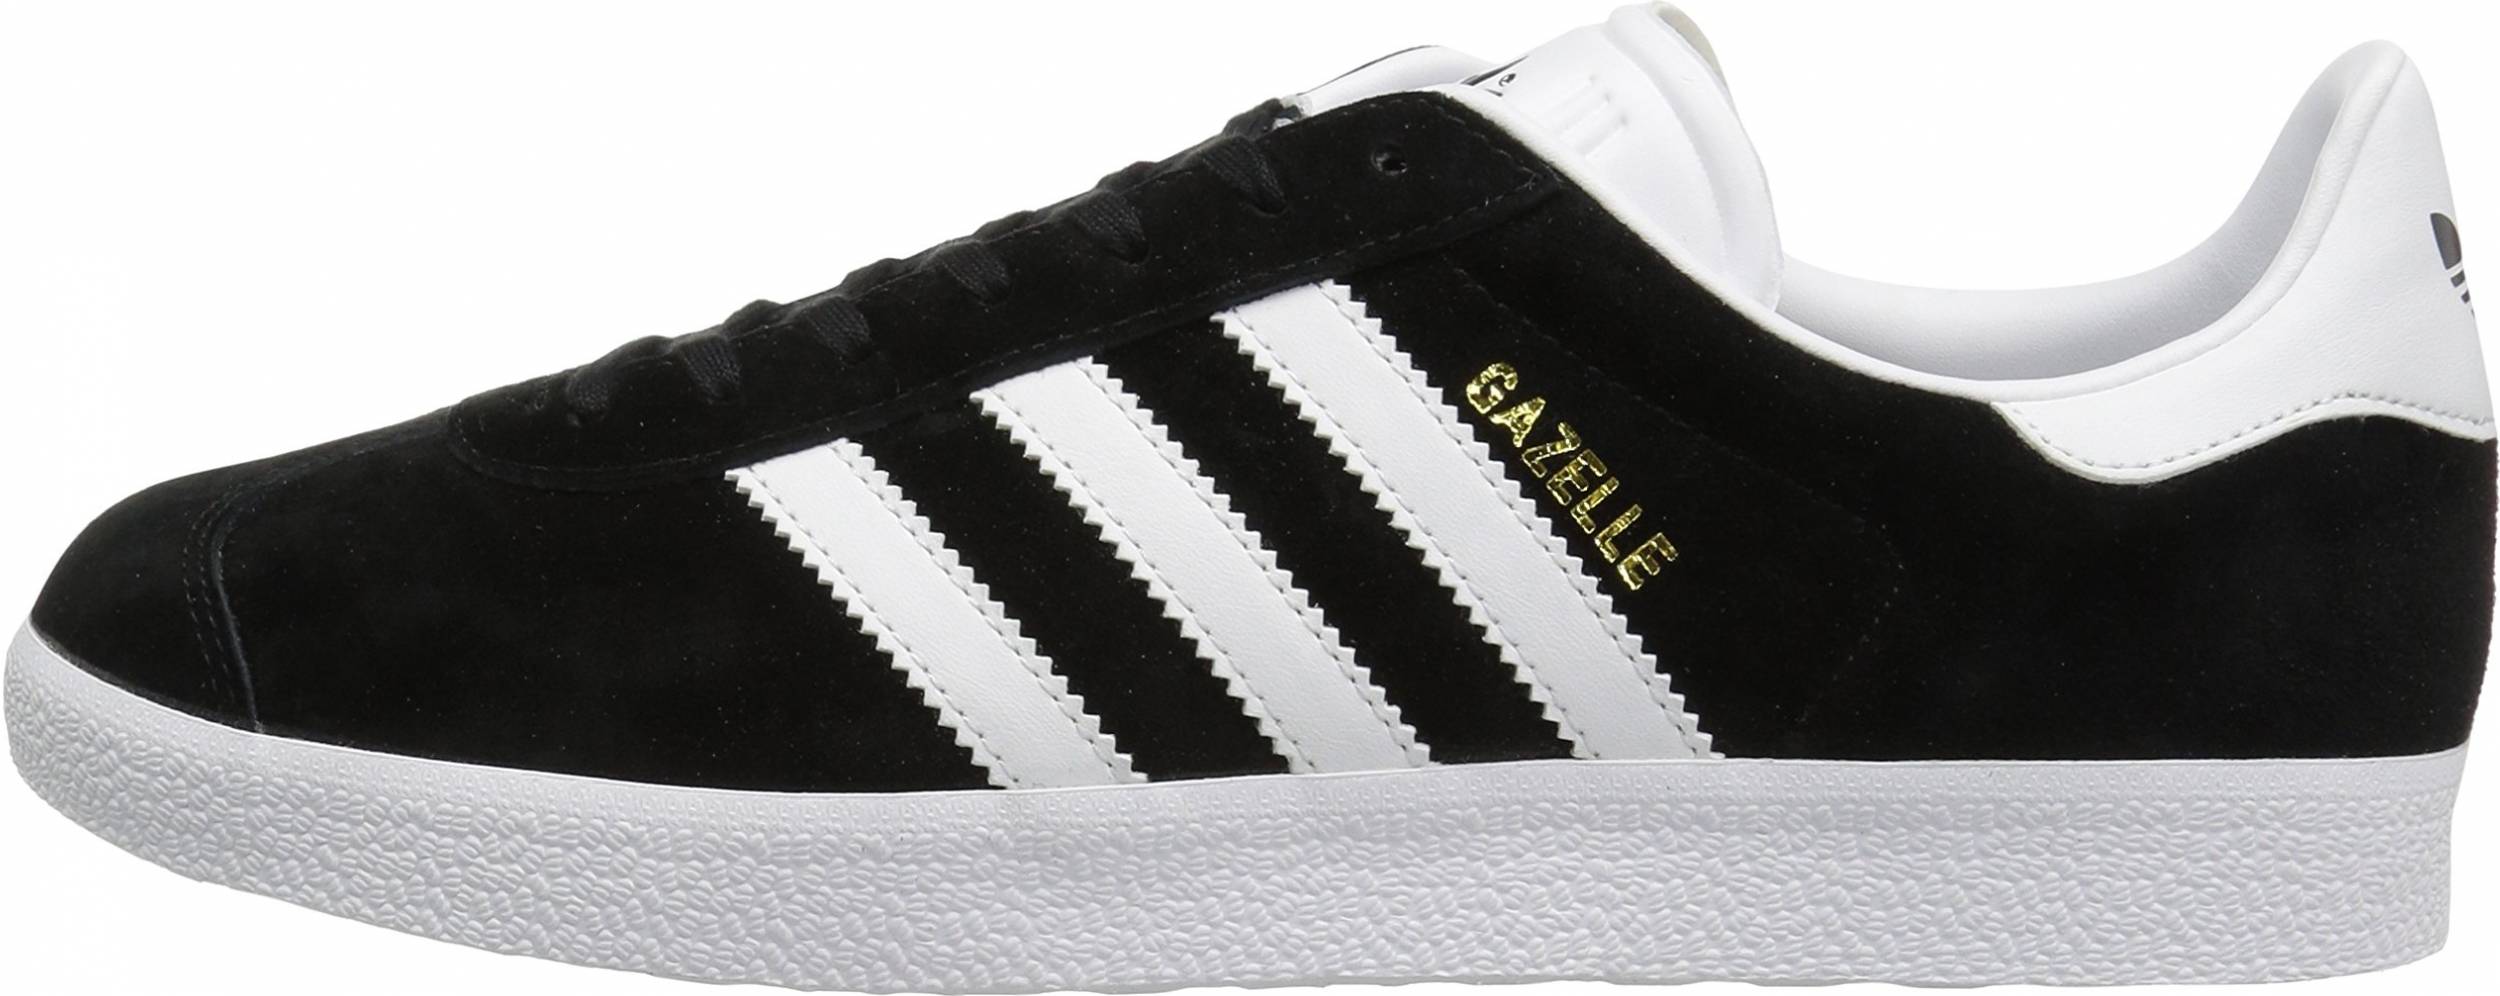 Adidas Gazelle sneakers in 50+ colors (only $39) | RunRepeat مسلسل قيم